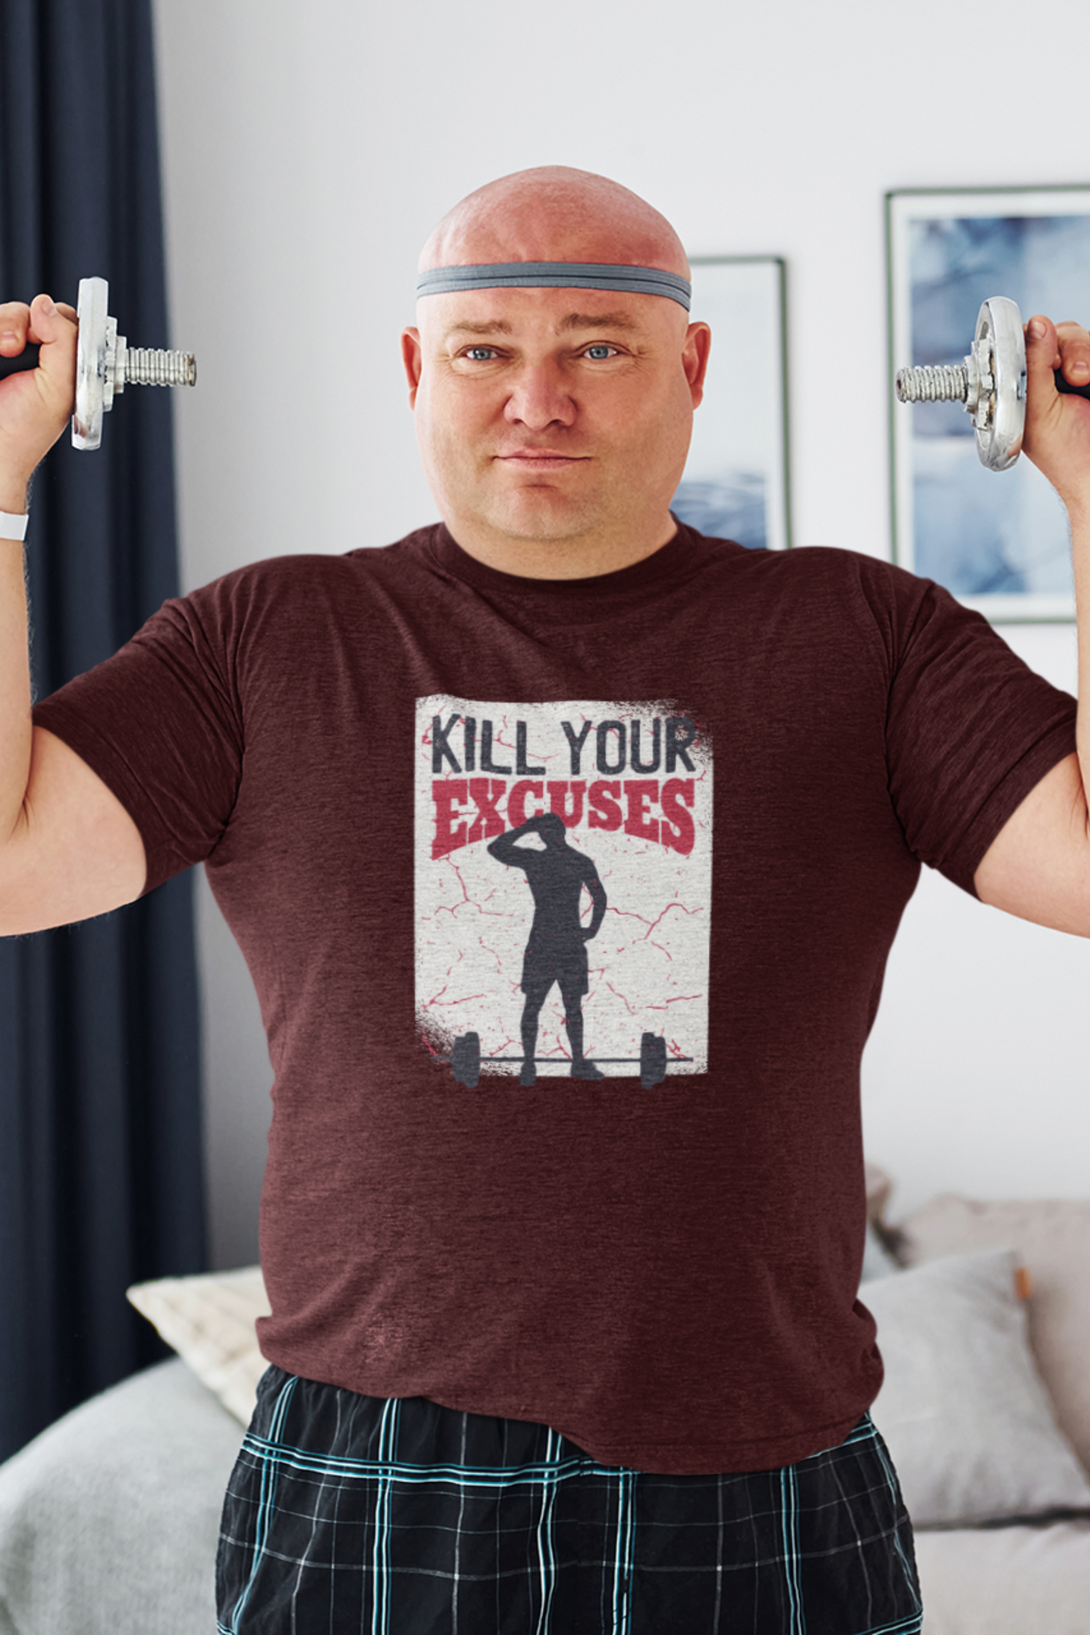 Kill Your Excuses Printed T-Shirt For Men - WowWaves - 6